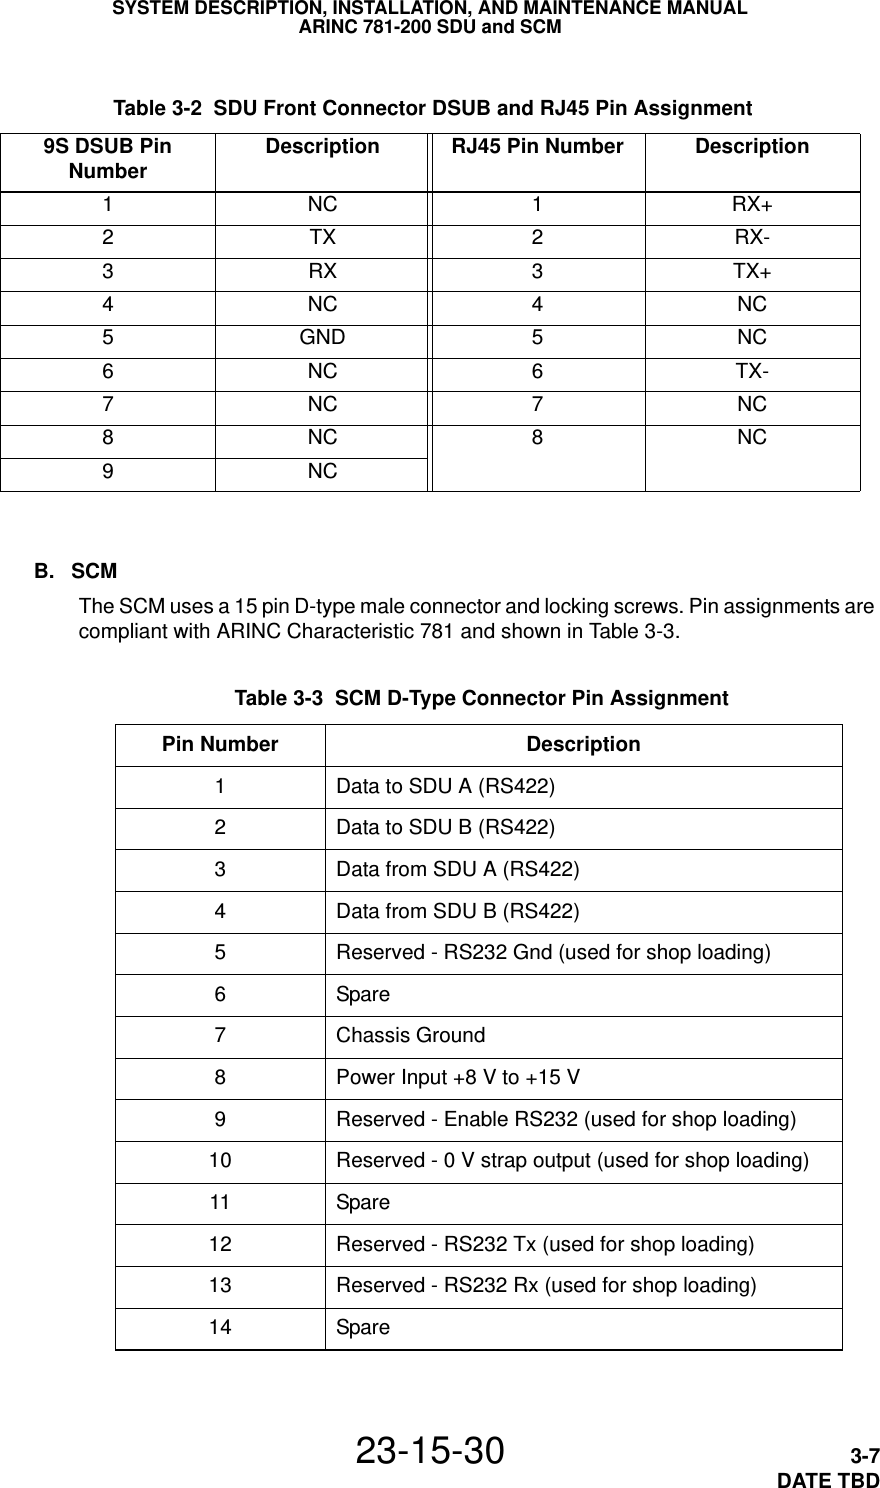  Table 3-2  SDU Front Connector DSUB and RJ45 Pin Assignment 9S DSUB Pin Number Description RJ45 Pin Number Description1NC 1RX+2TX 2RX-3RX 3TX+4NC 4NC5GND 5NC6NC 6TX-7NC 7NC8NC 8NC9NCSYSTEM DESCRIPTION, INSTALLATION, AND MAINTENANCE MANUALARINC 781-200 SDU and SCM23-15-30 3-7DATE TBDB. SCMThe SCM uses a 15 pin D-type male connector and locking screws. Pin assignments are compliant with ARINC Characteristic 781 and shown in Table 3-3. Table 3-3  SCM D-Type Connector Pin Assignment Pin Number Description1Data to SDU A (RS422)2Data to SDU B (RS422)3Data from SDU A (RS422)4Data from SDU B (RS422)5Reserved - RS232 Gnd (used for shop loading)6Spare7Chassis Ground8Power Input +8 V to +15 V9Reserved - Enable RS232 (used for shop loading)10 Reserved - 0 V strap output (used for shop loading)11 Spare12 Reserved - RS232 Tx (used for shop loading)13 Reserved - RS232 Rx (used for shop loading)14 Spare